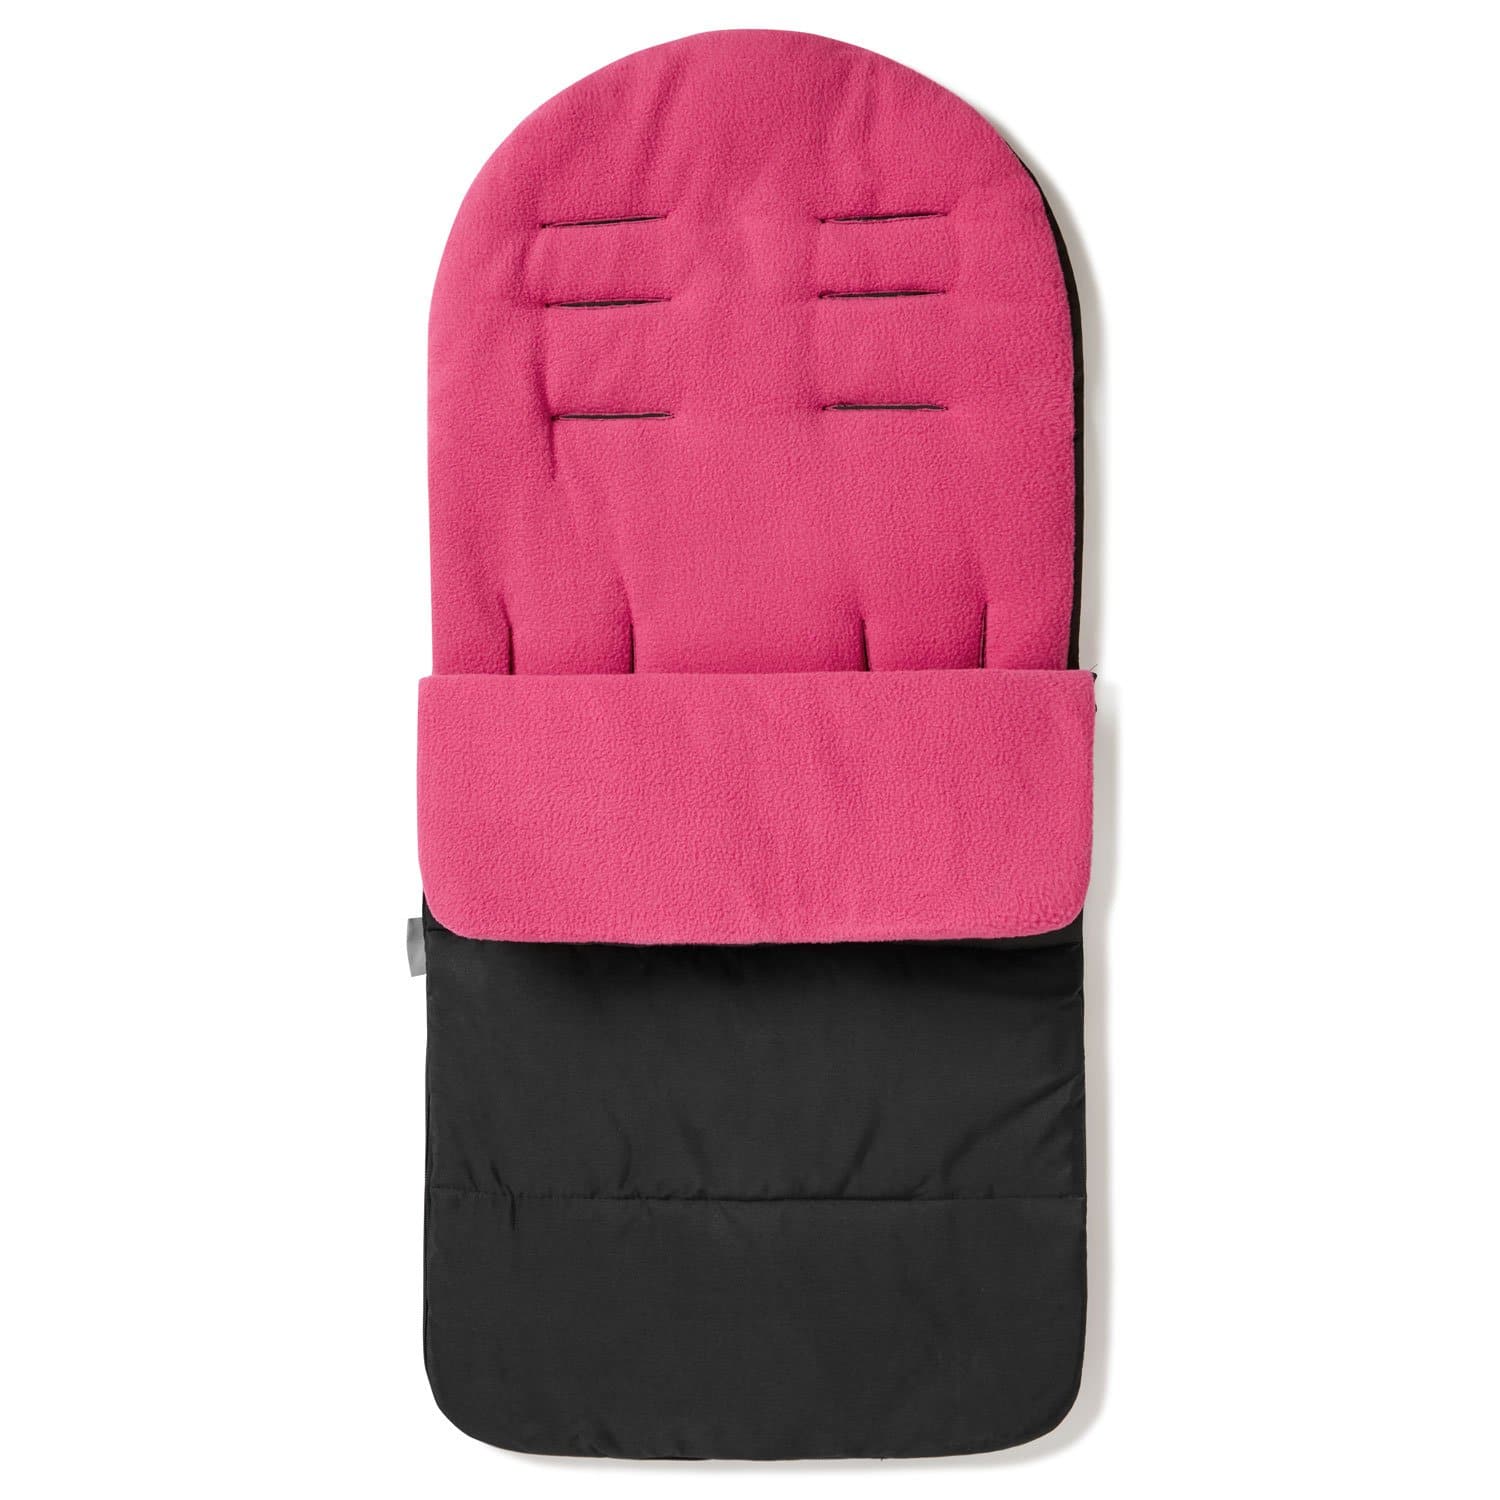 Premium Footmuff / Cosy Toes Compatible with Out 'n' About - Pink Rose / Fits All Models | For Your Little One